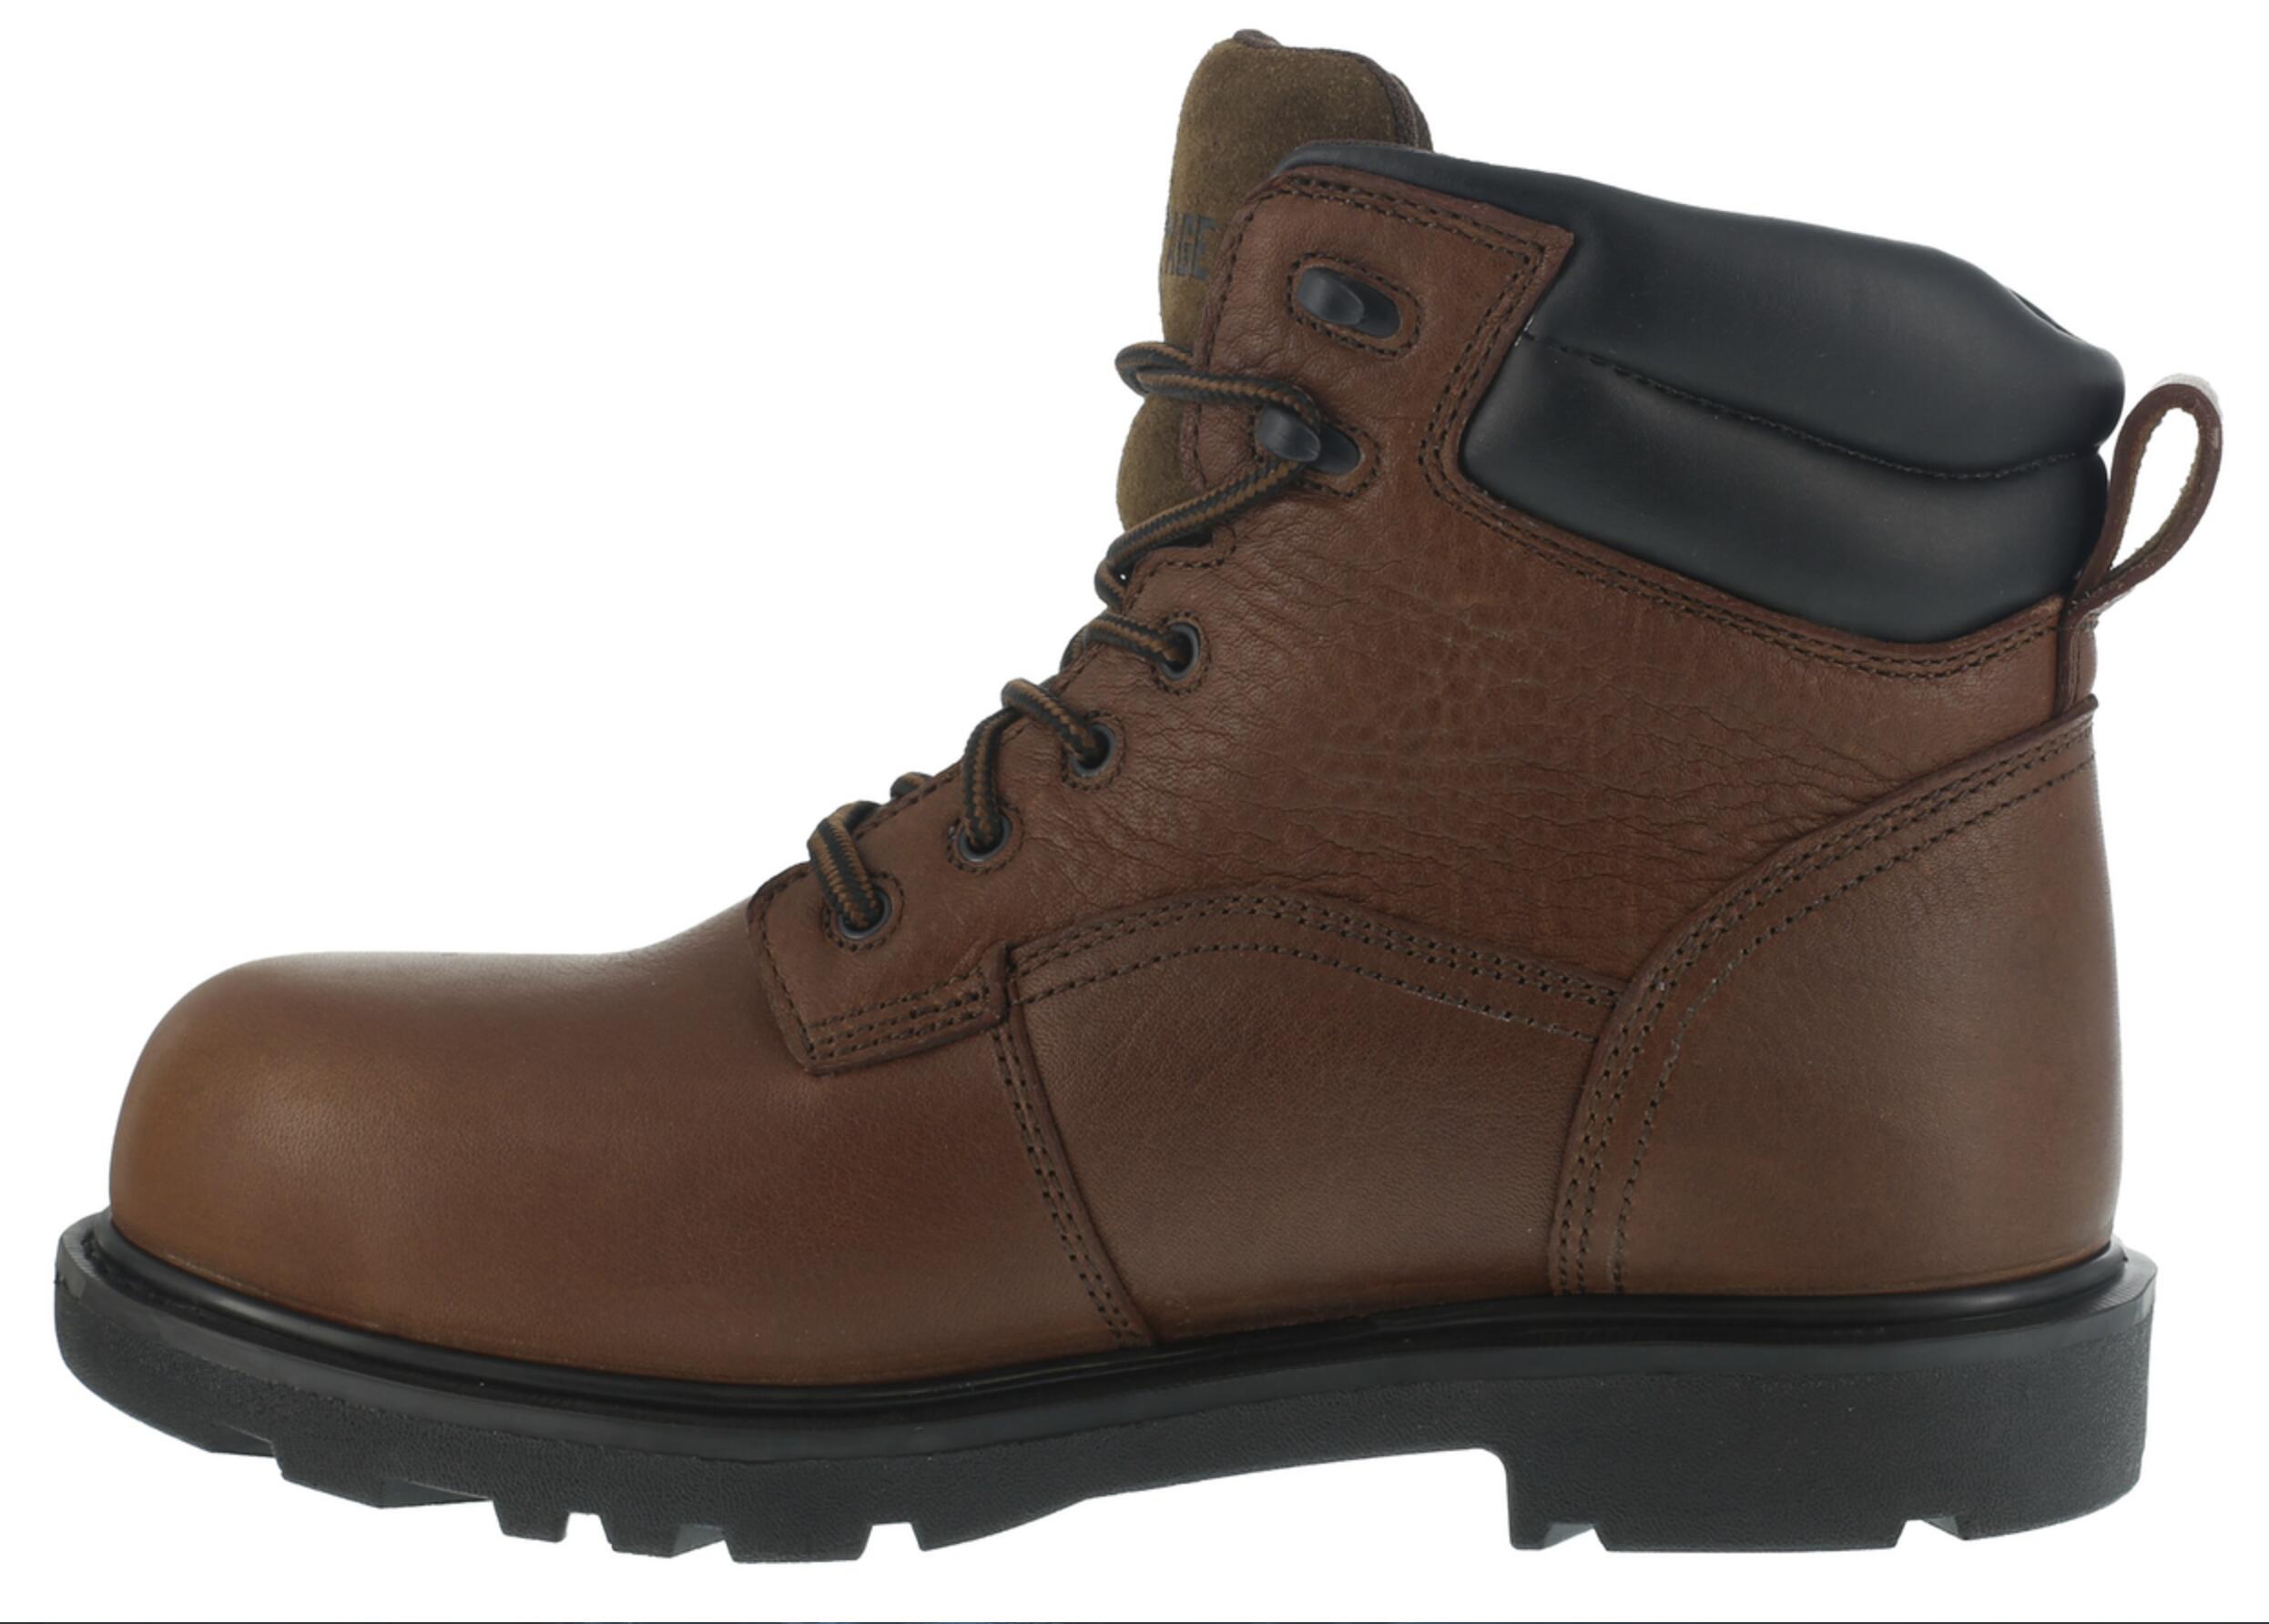 High-quality Leather Goodyear Welt Boots for Men: A Smart Investment for Your Wardrobe